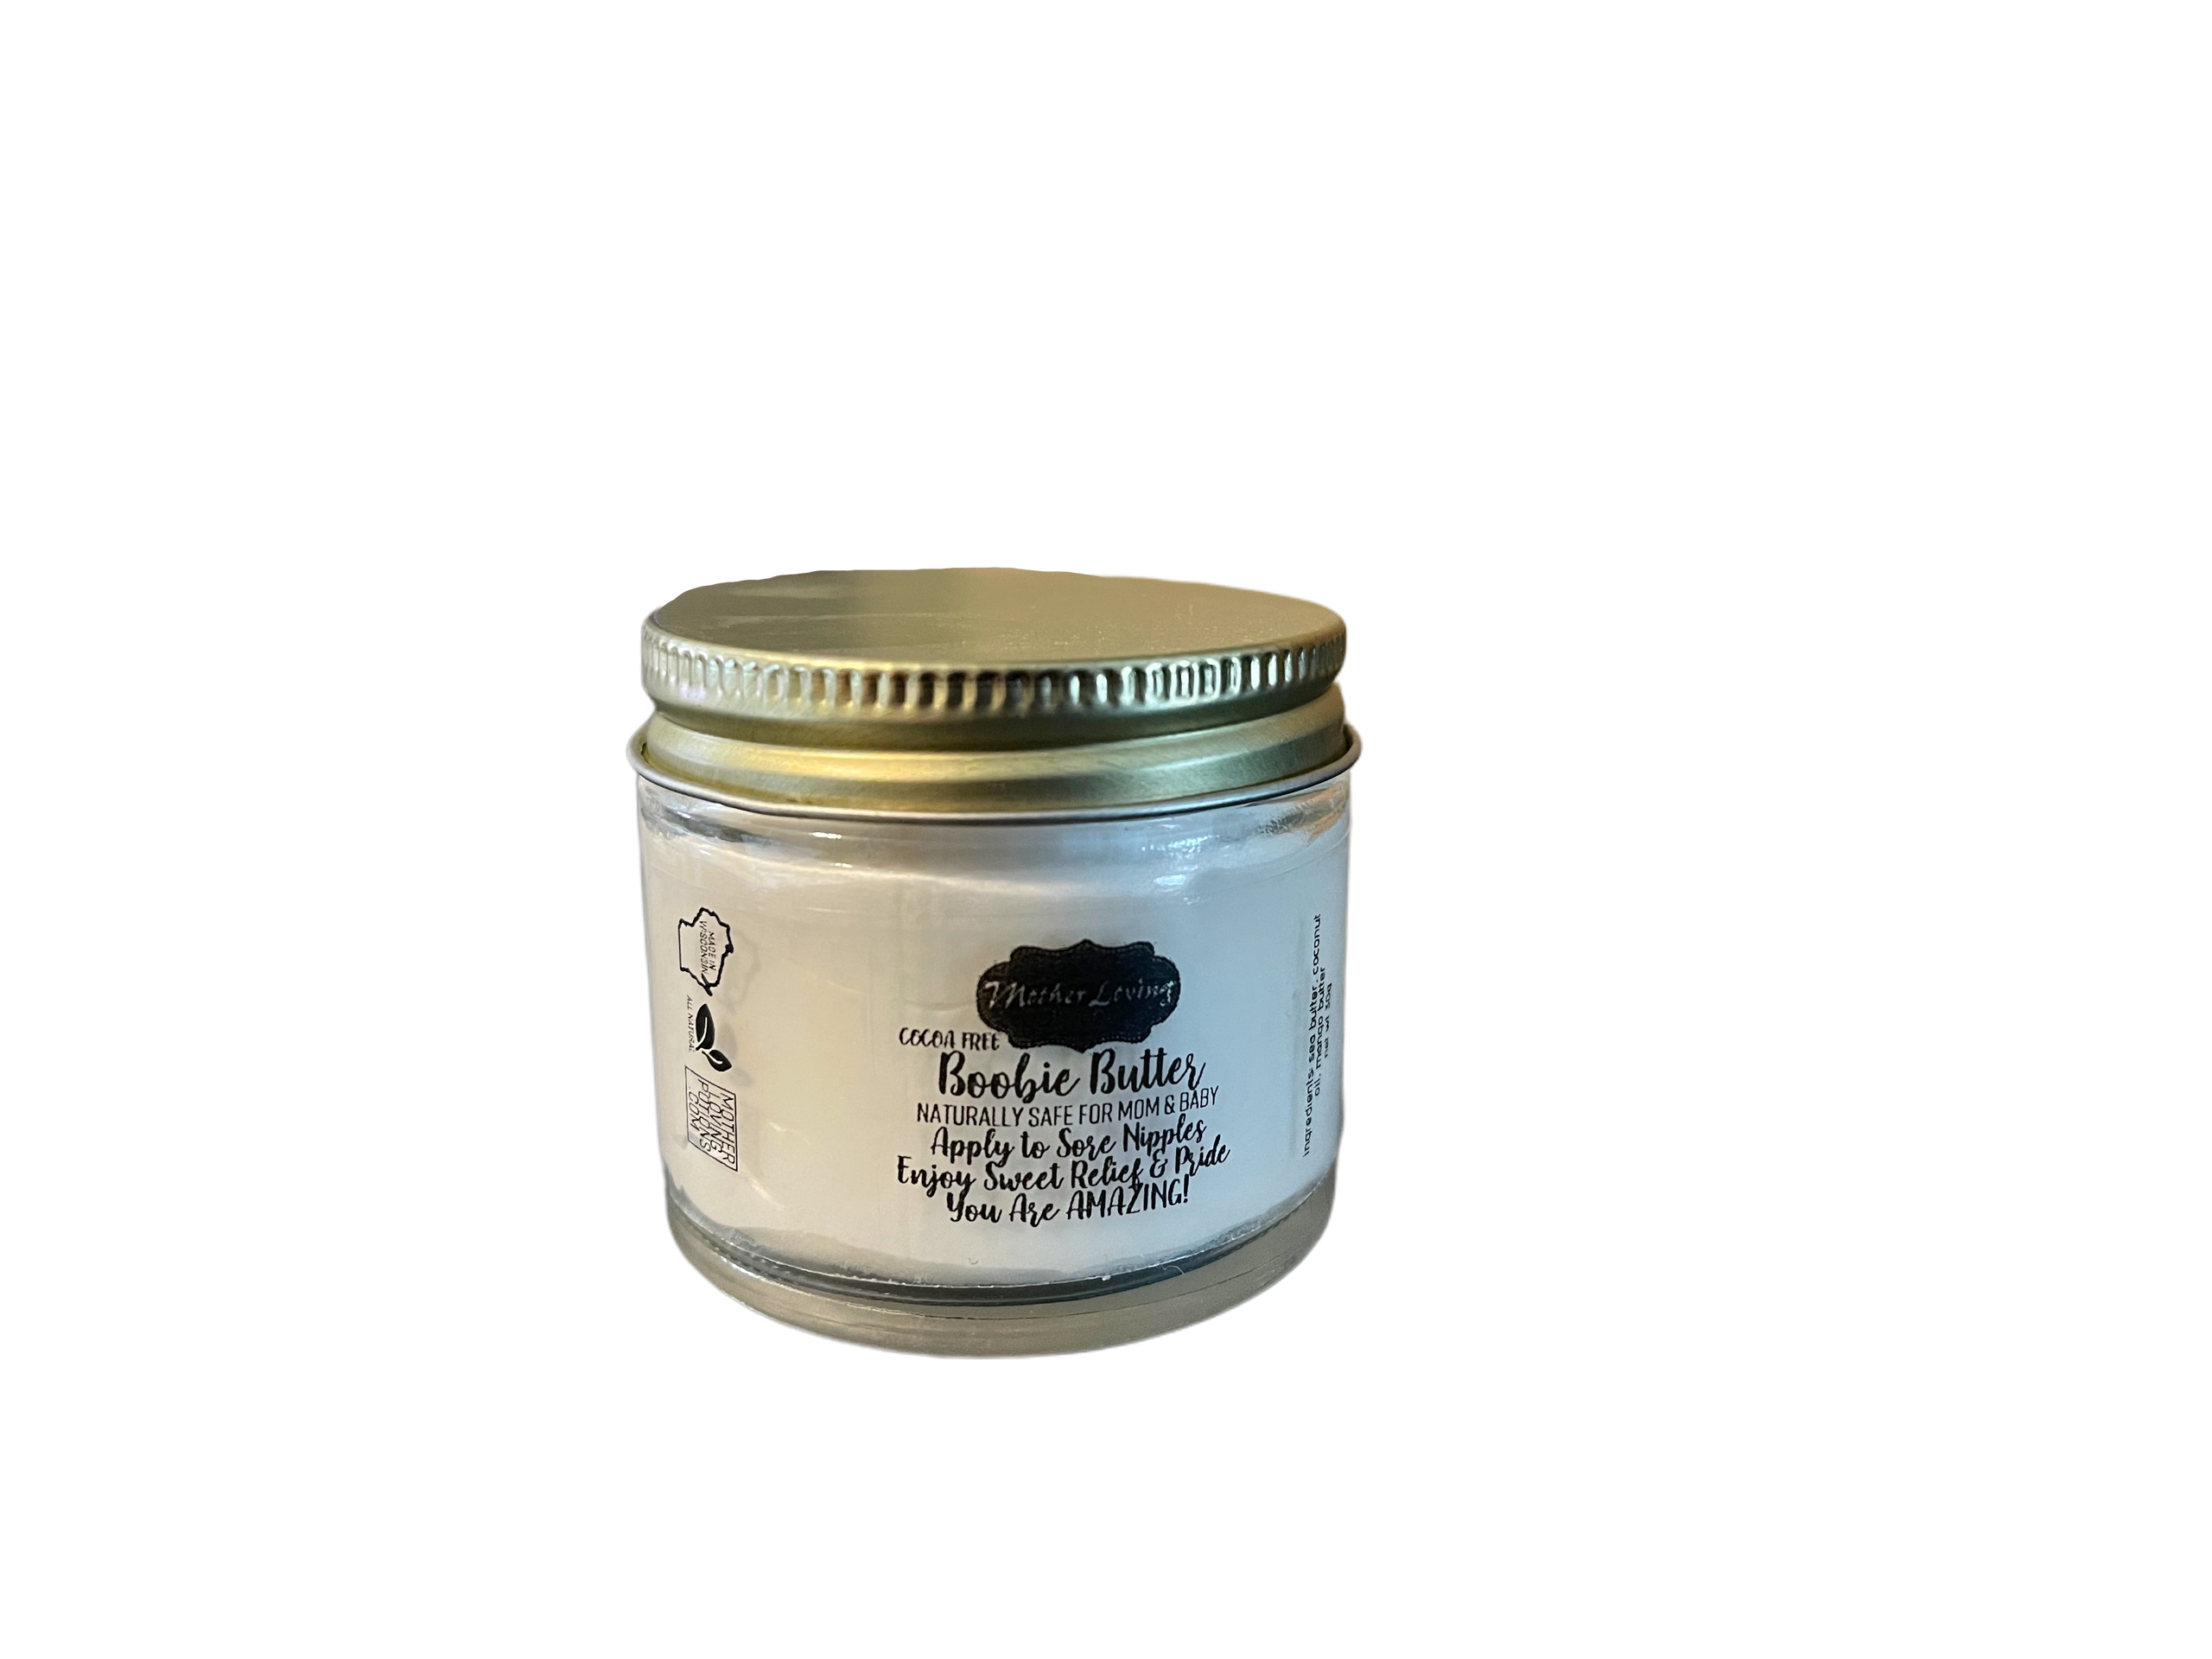 Whipped Boobie Butter Nipple Cream  Artisanal Skincare & Natural Solutions  Clean. Mom-Owned. Responsible. Ethical. Safe.